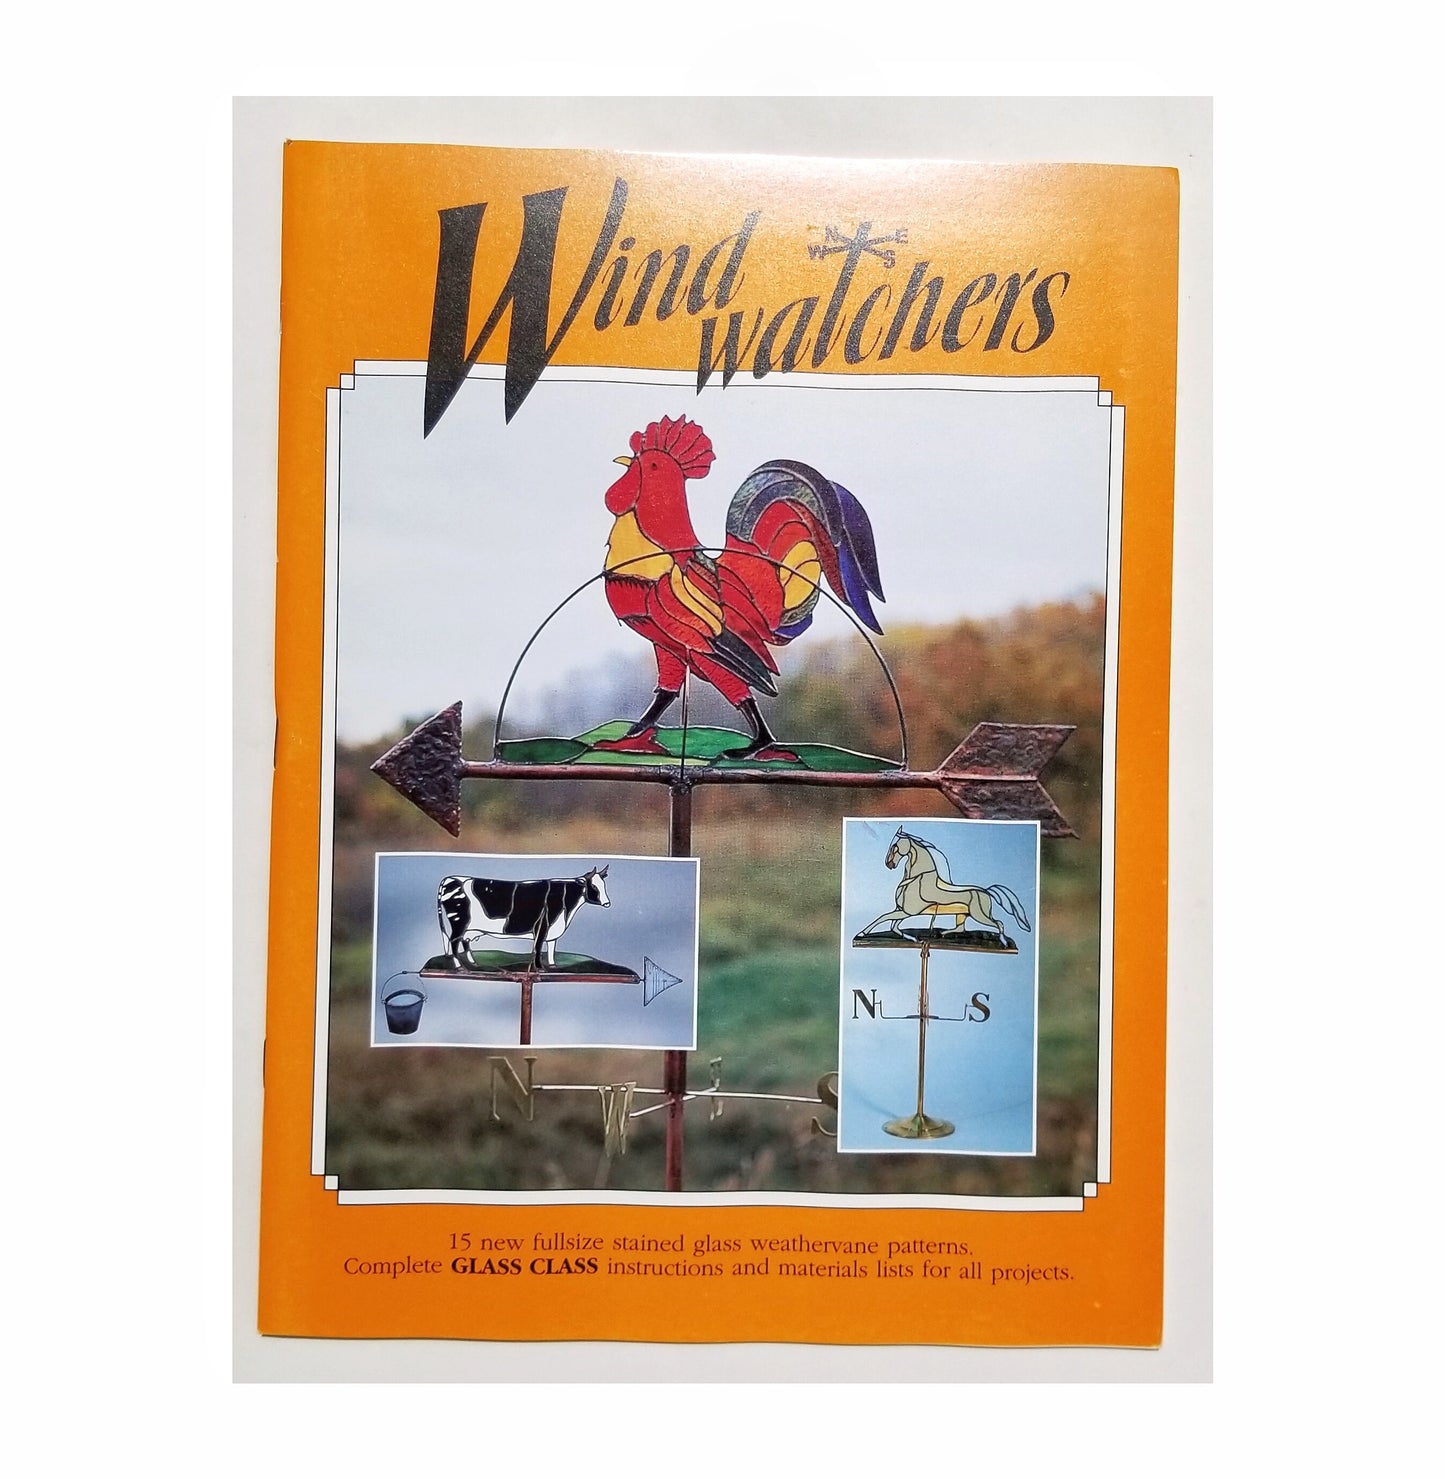 Stained Glass Design Book. Nice variety of line drawings for these unusual Weathervane projects.